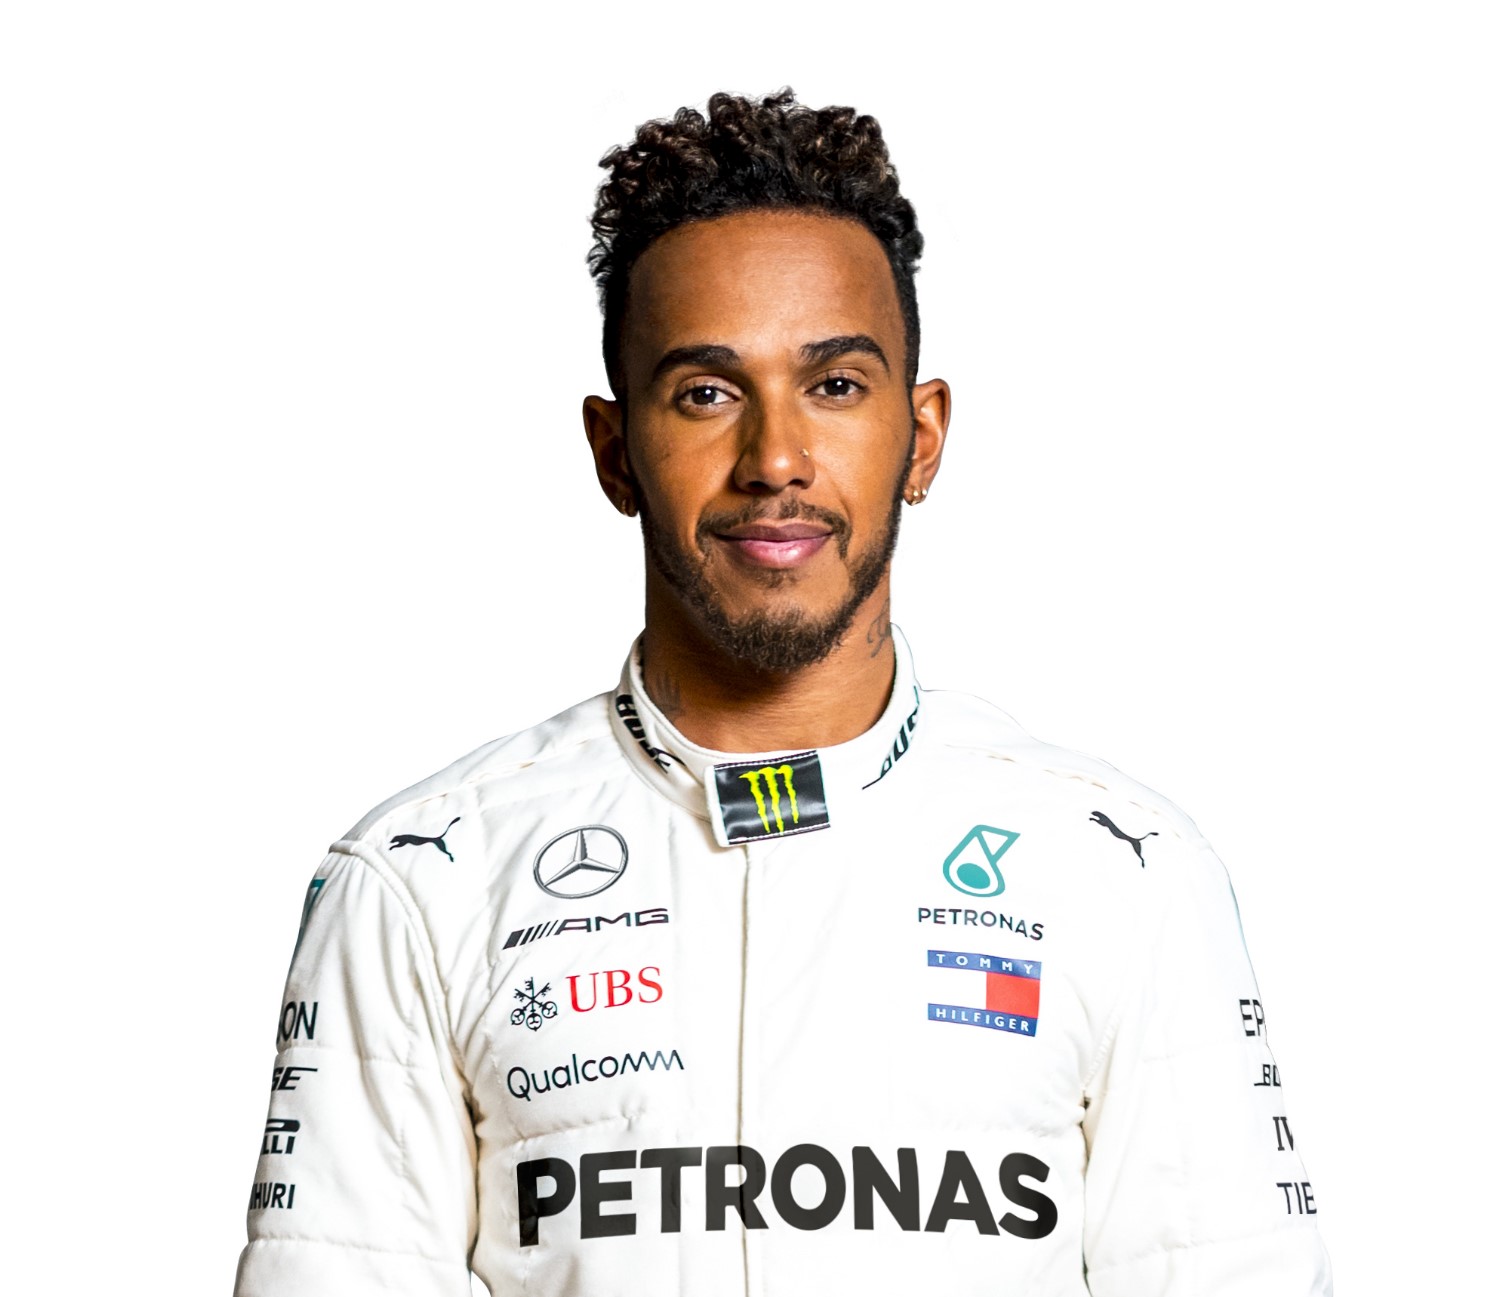 Hamilton should dominate this weekend.